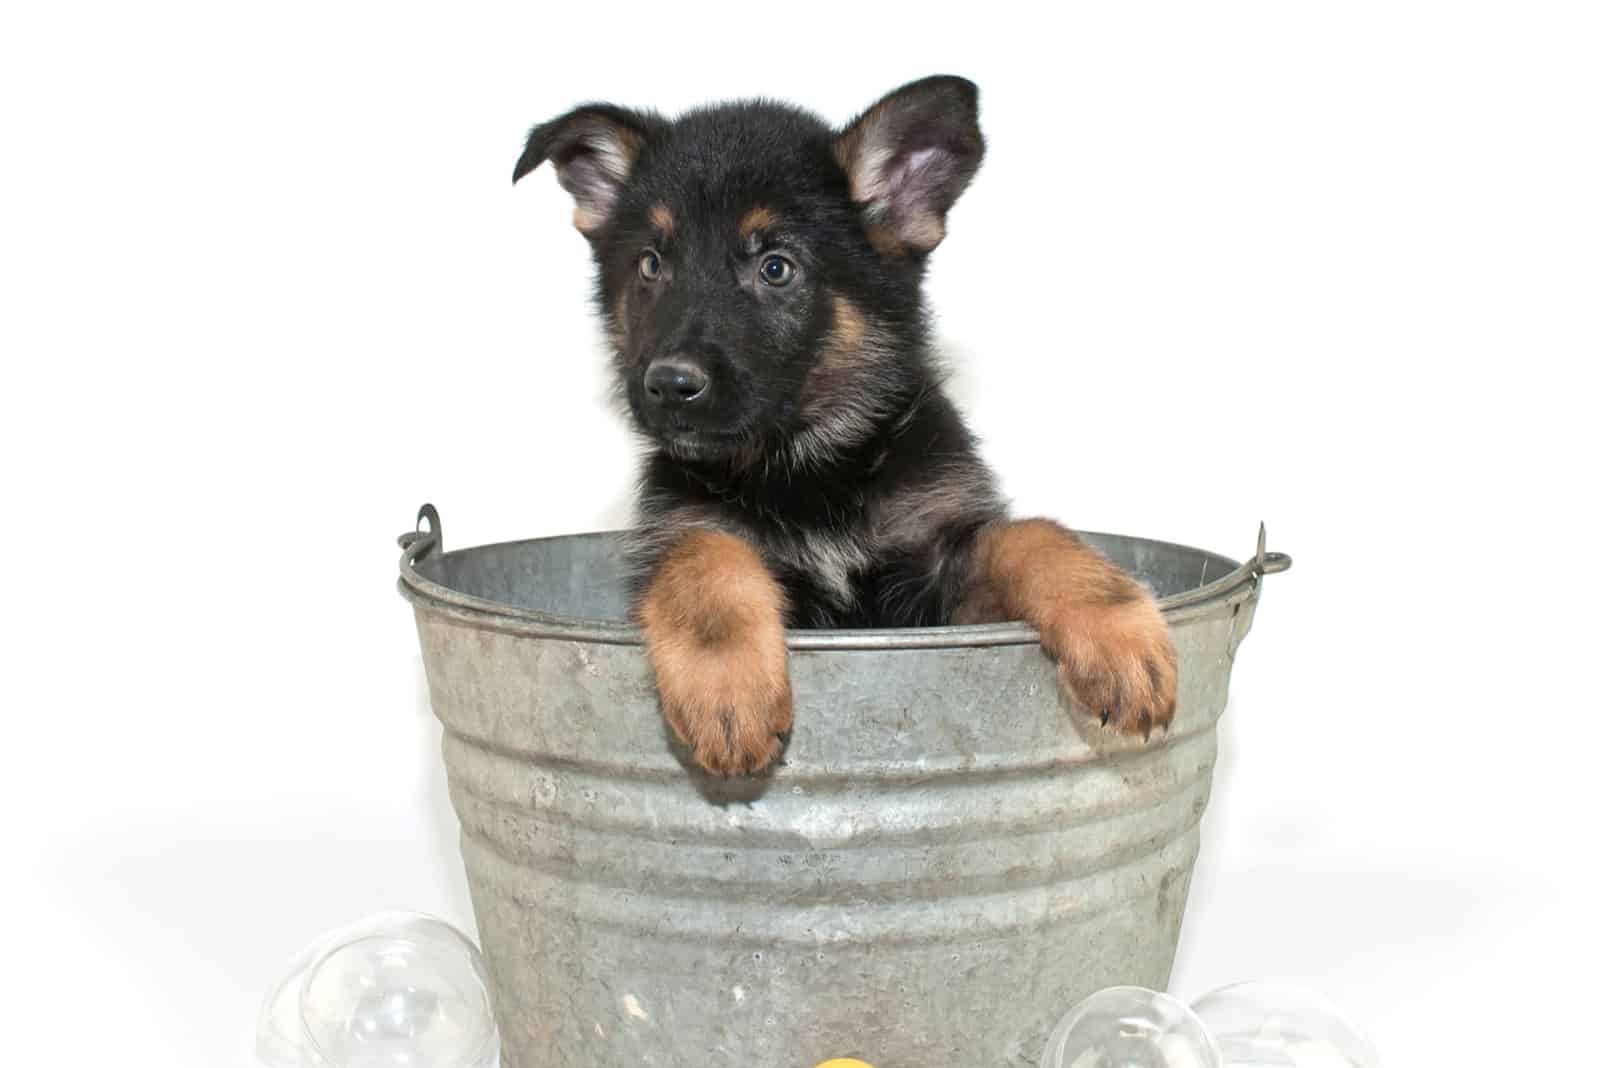 Sweet little puppy in a bath tub with bubbles